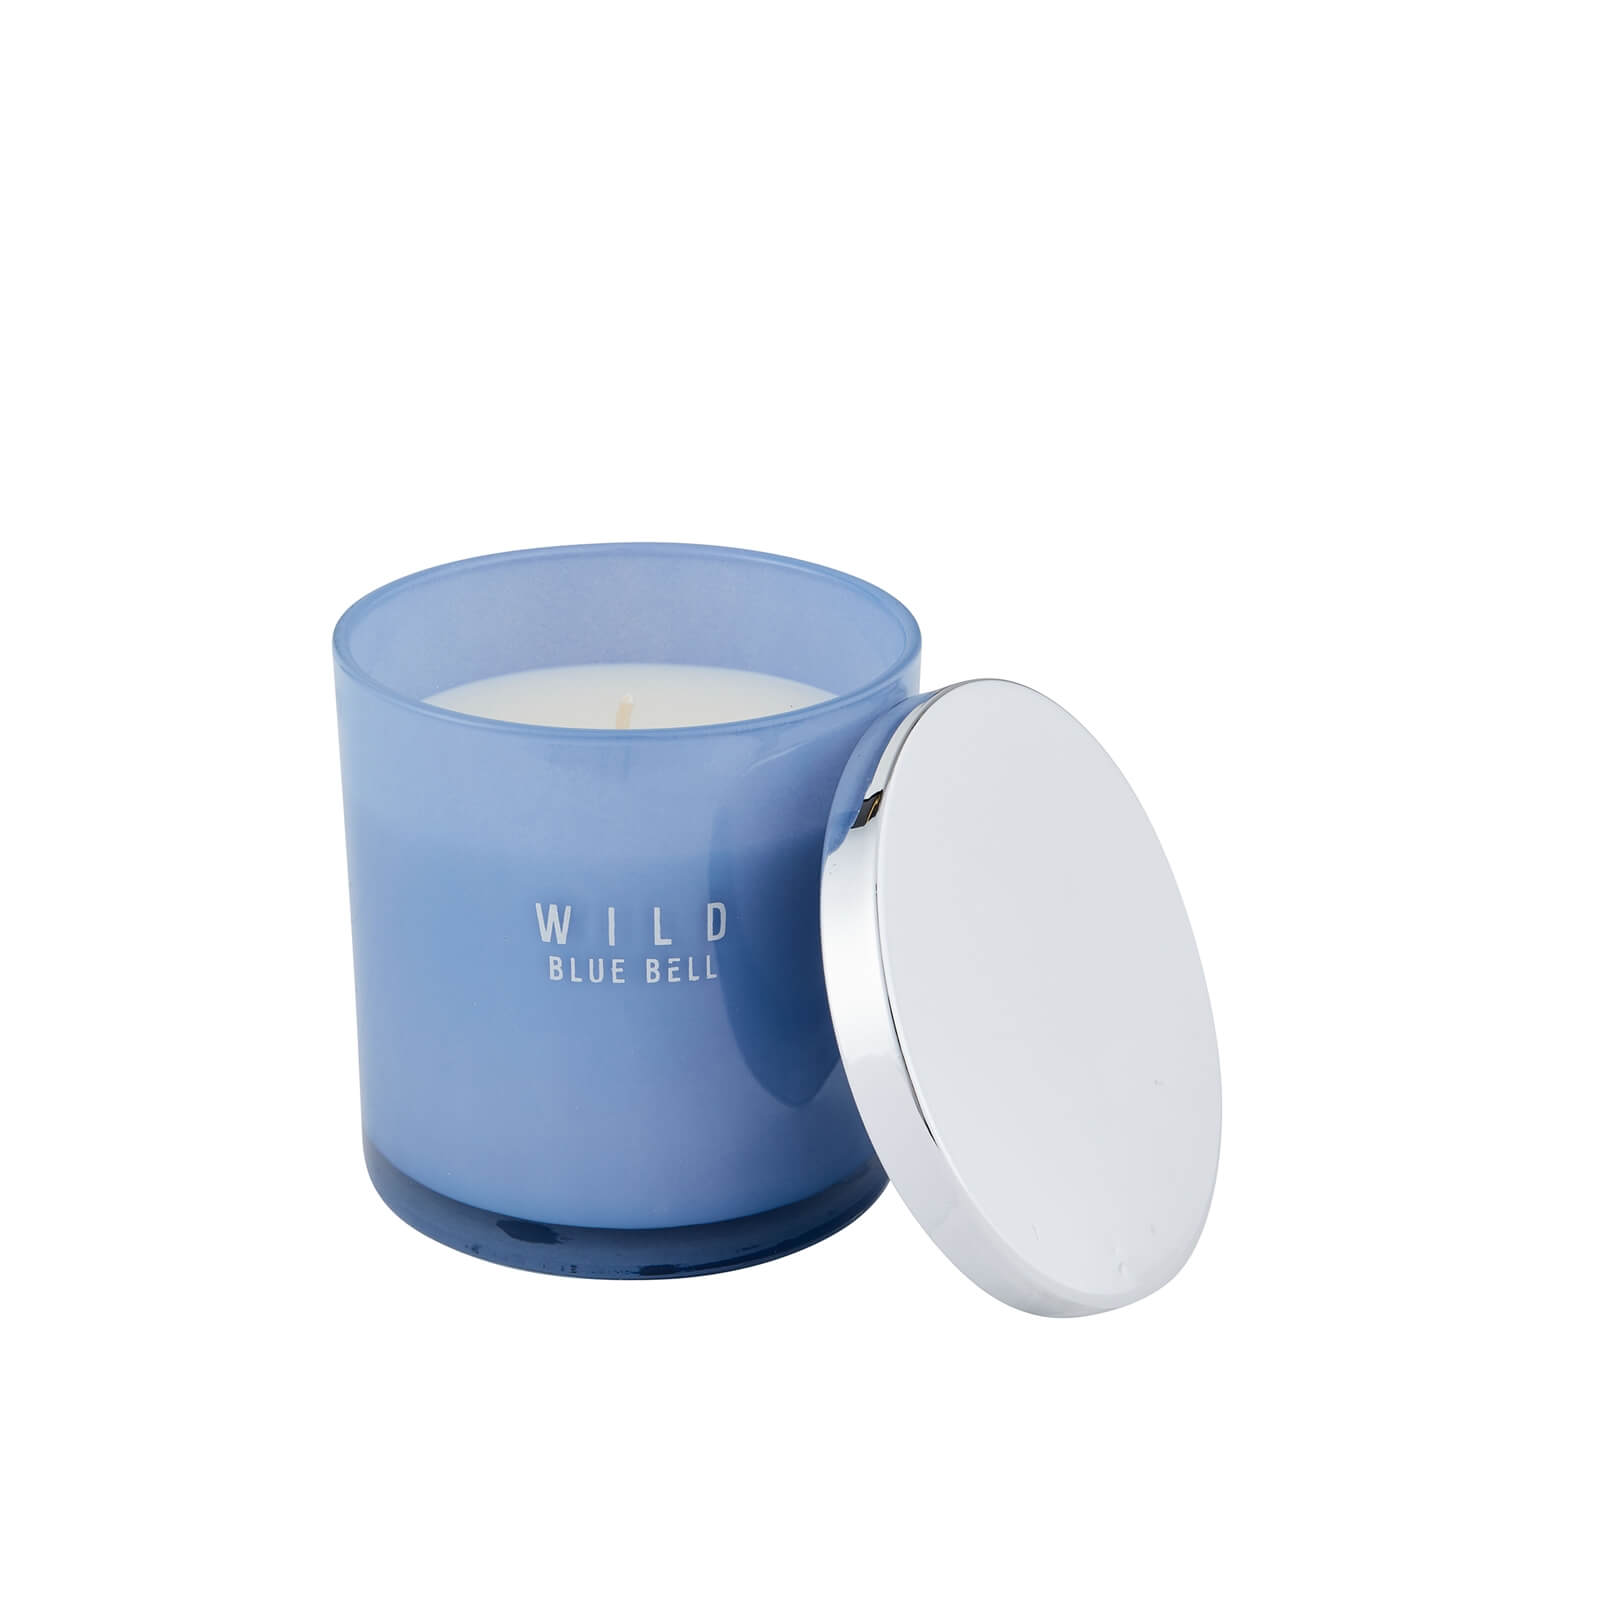 Wild Bluebell Candle with Lid